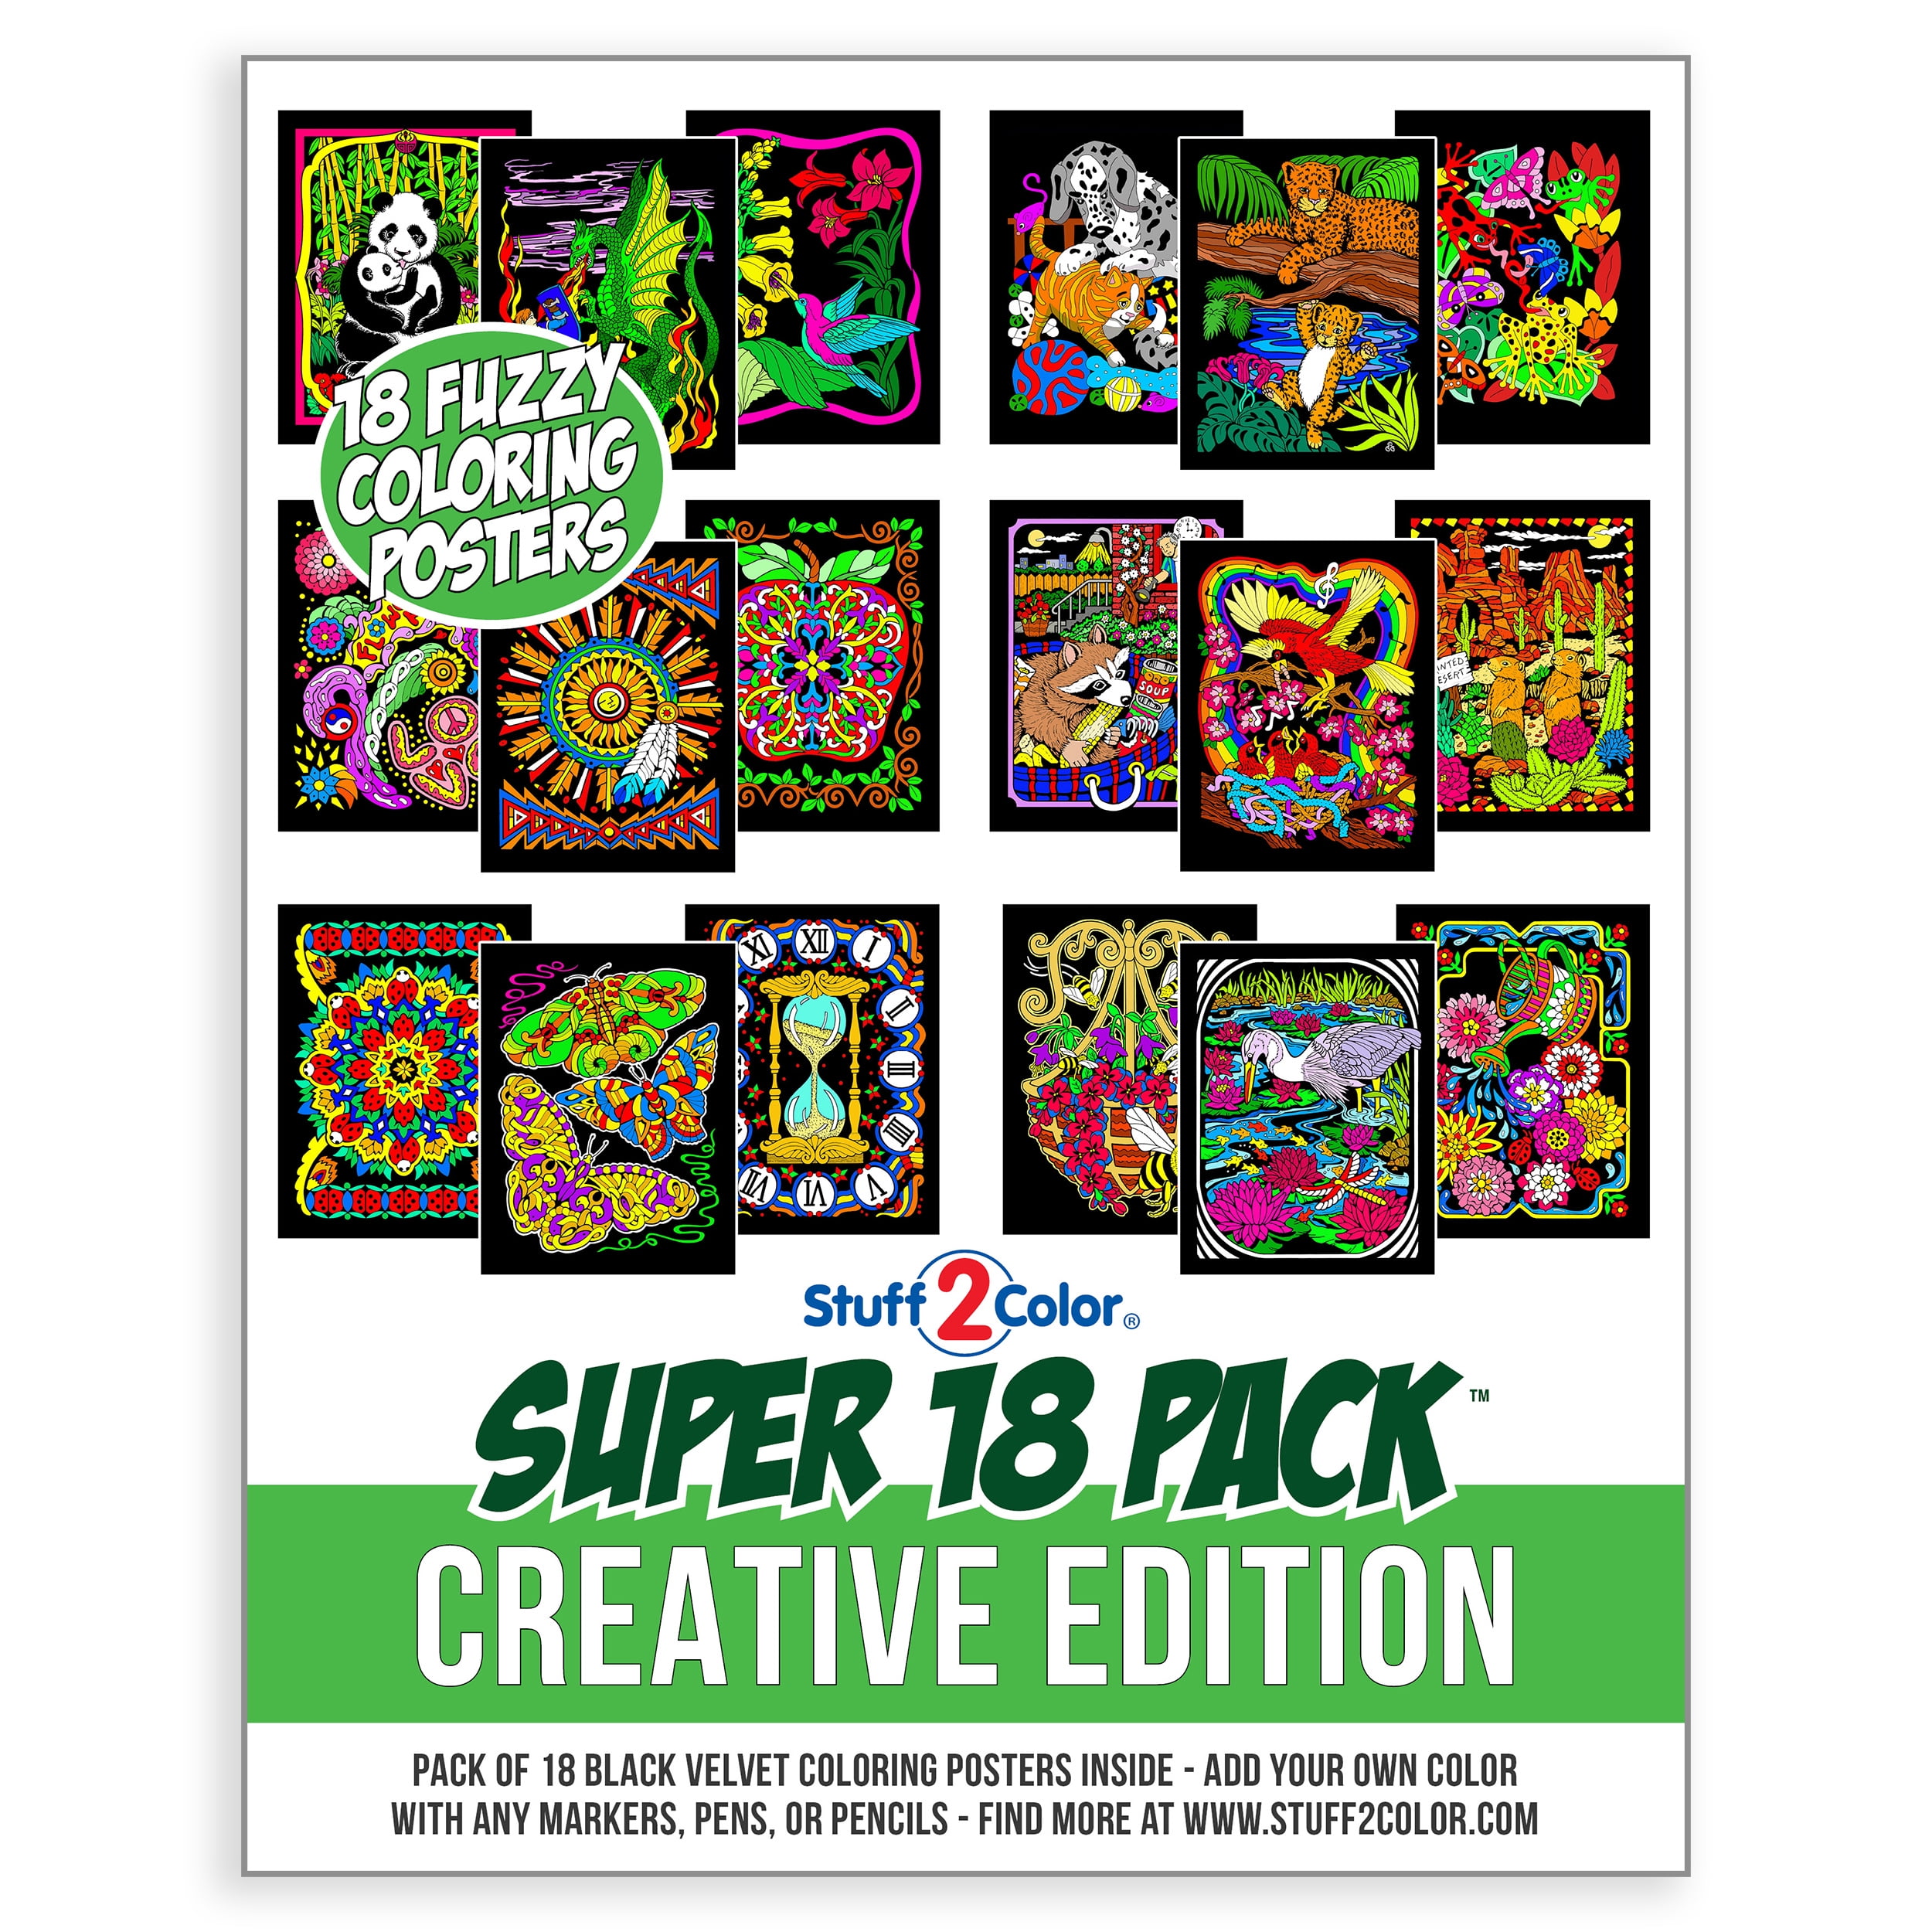 Stuff2Color Super Pack of 18 Fuzzy Coloring Posters (Silly Kitties Edition)  - Arts & Crafts for Kids, Toddlers, Girls, Boys & Adults 